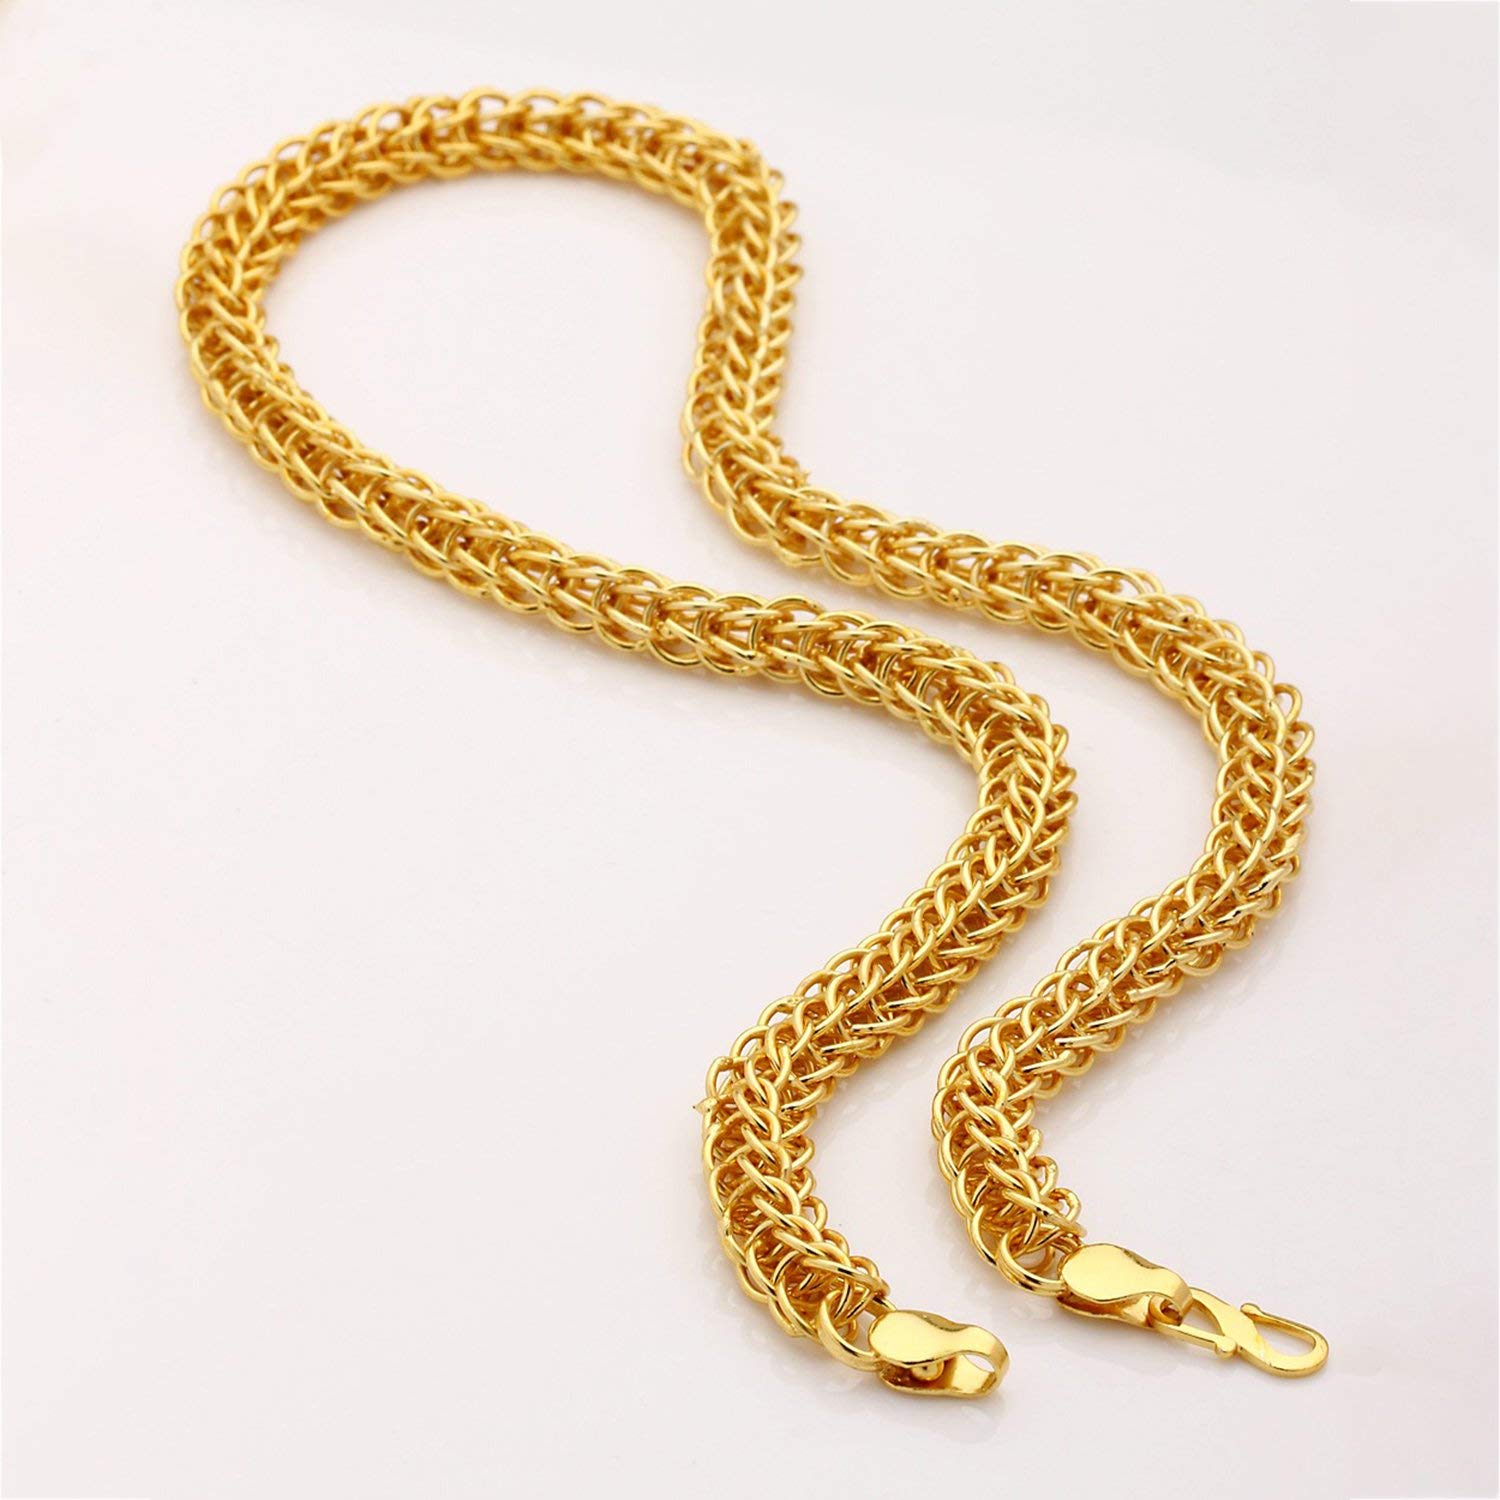 Yellow Chimes Gold Plated Latest Fashion Broad Long Interlinked Neck Chains for Men and Boys